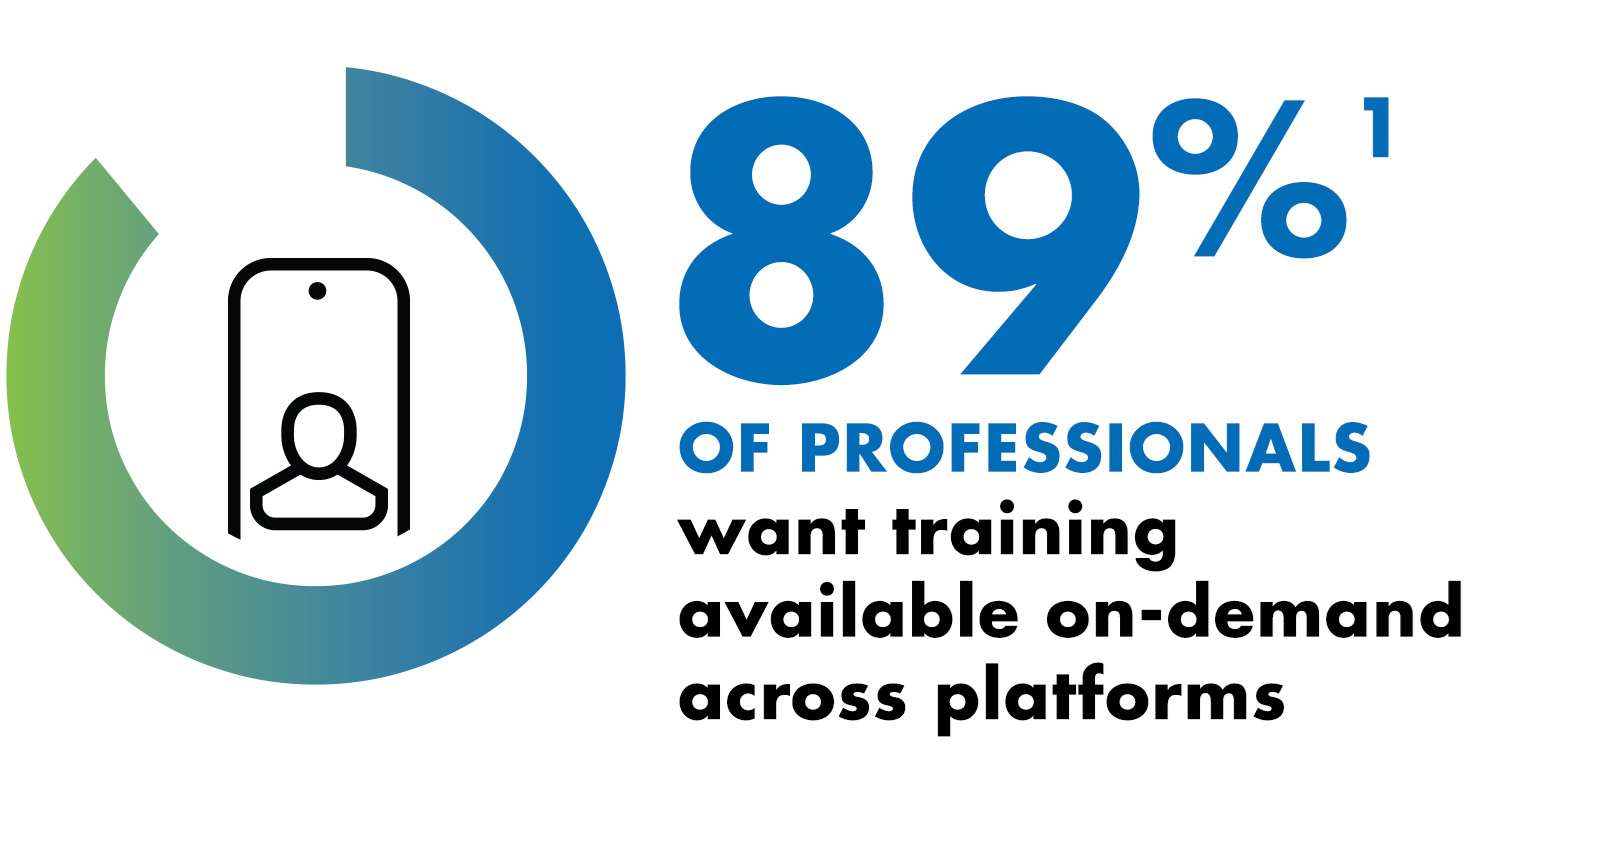 Icon graphic with text that says "89 percent of professionals want training available on-demand across platforms"